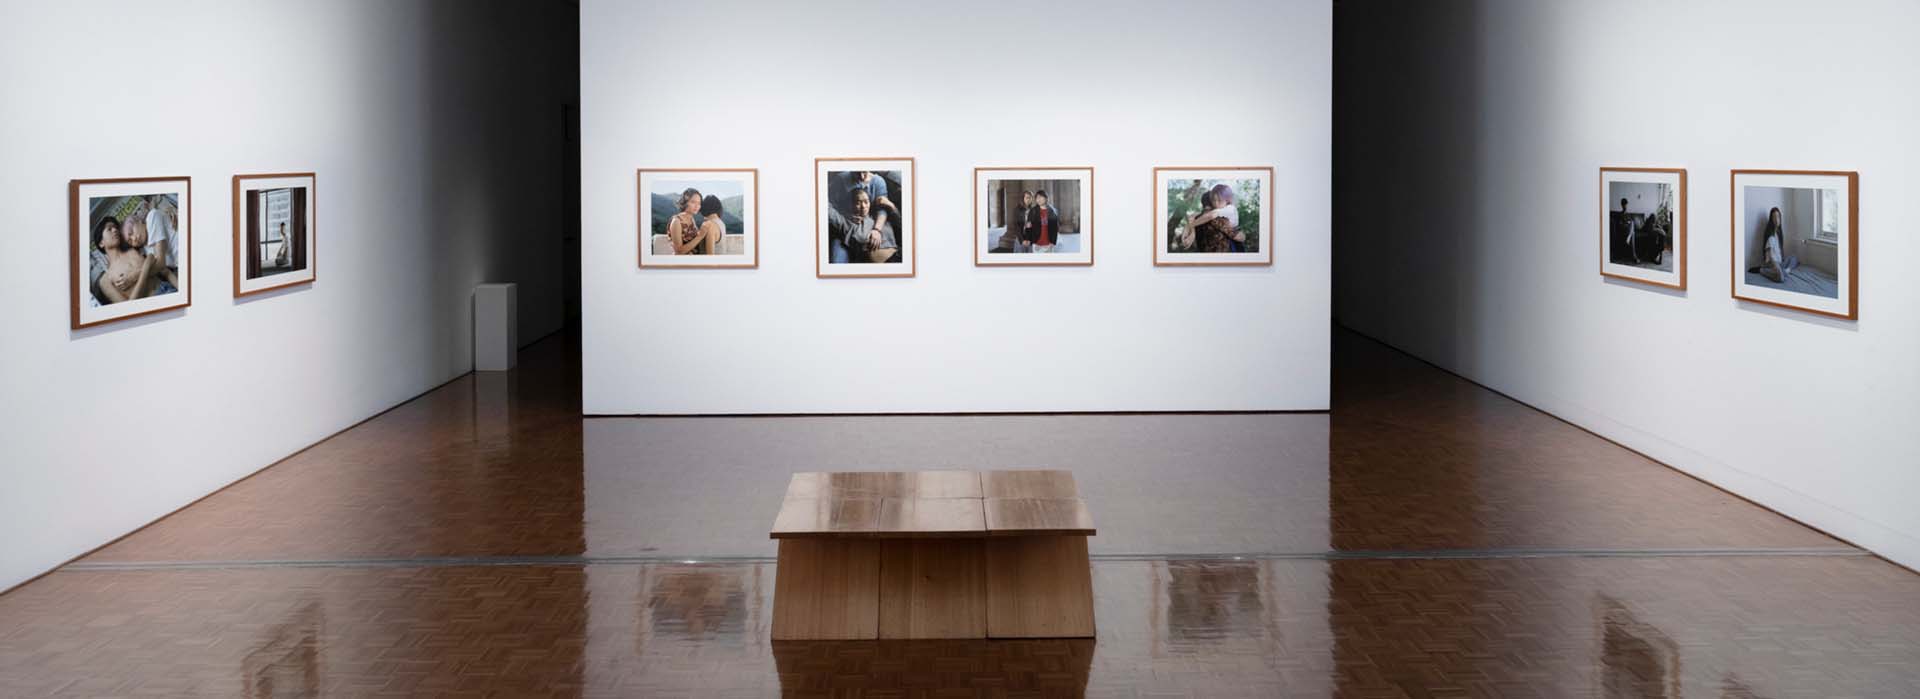 An exhibition of photographs in the Delmar gallery with a wooden bench.